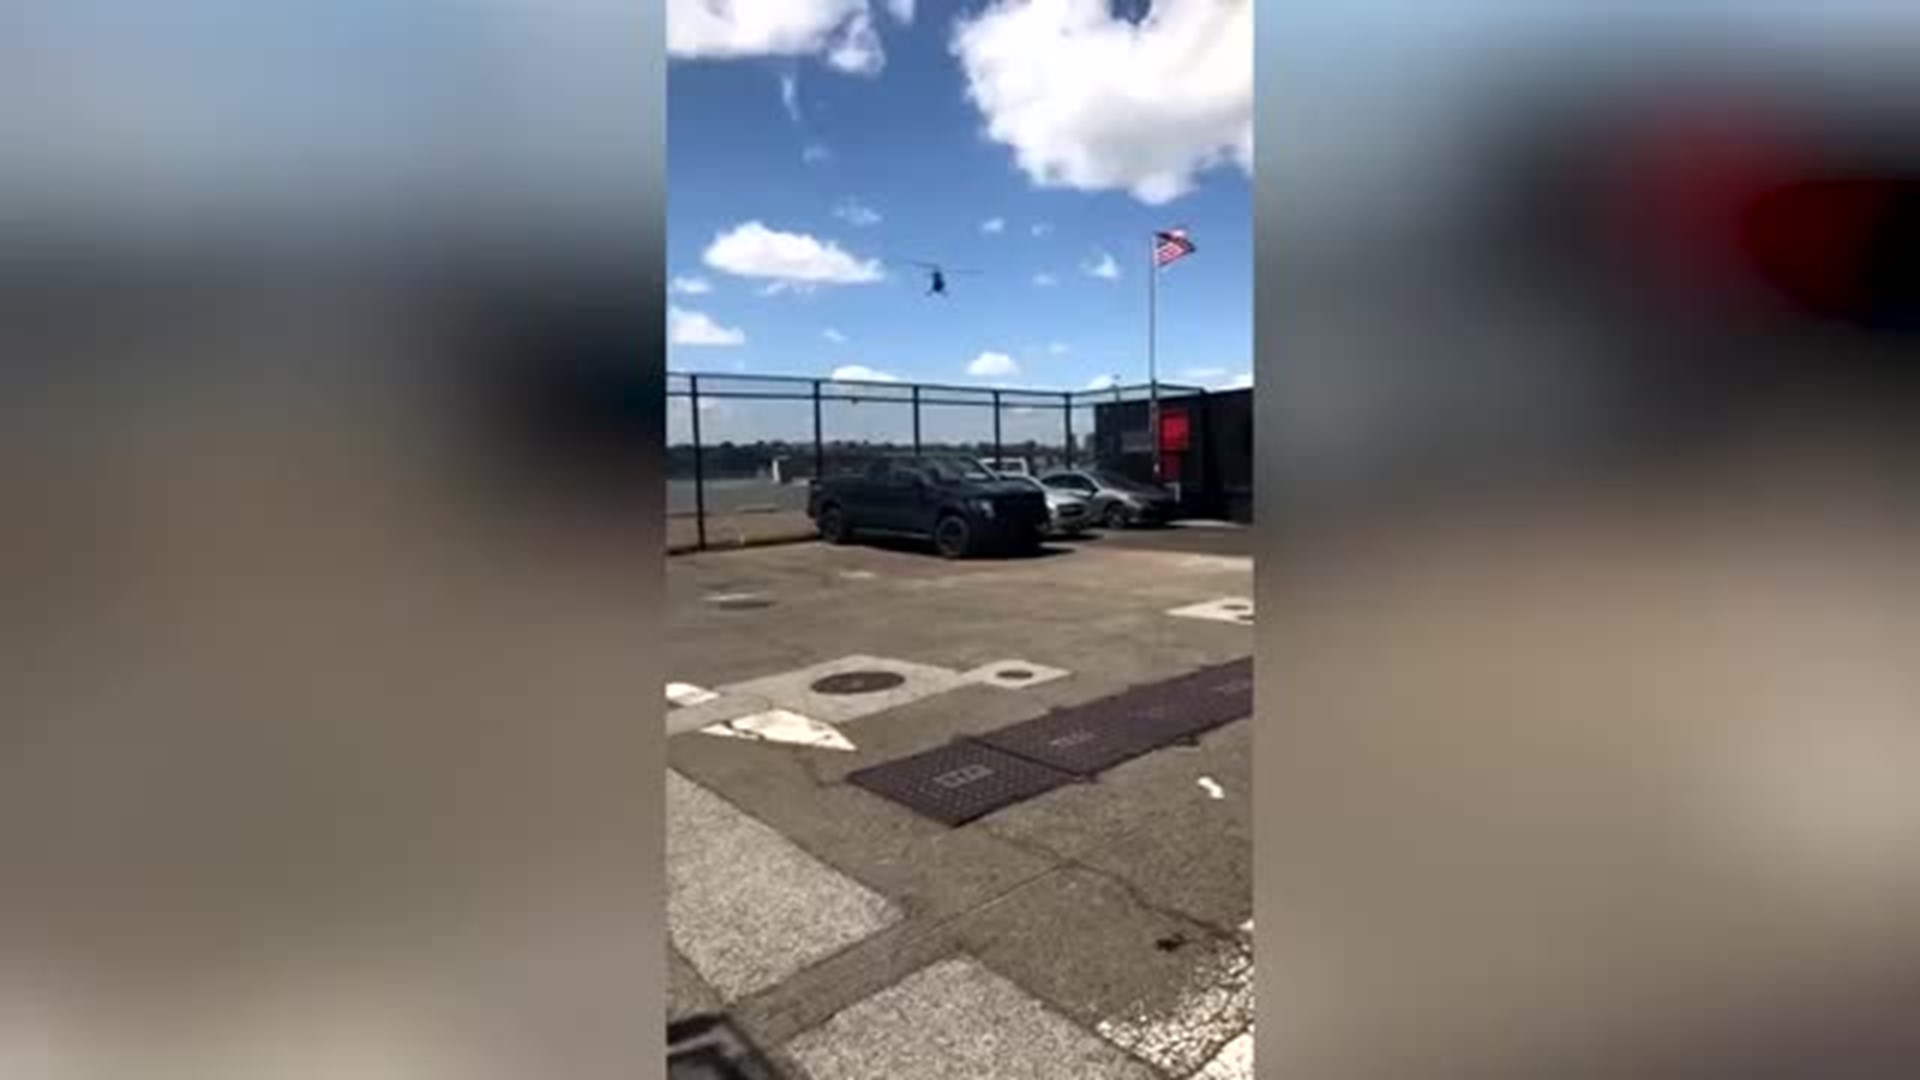 NY HELICOPTER CRASHES INTO HUDSON RIVER